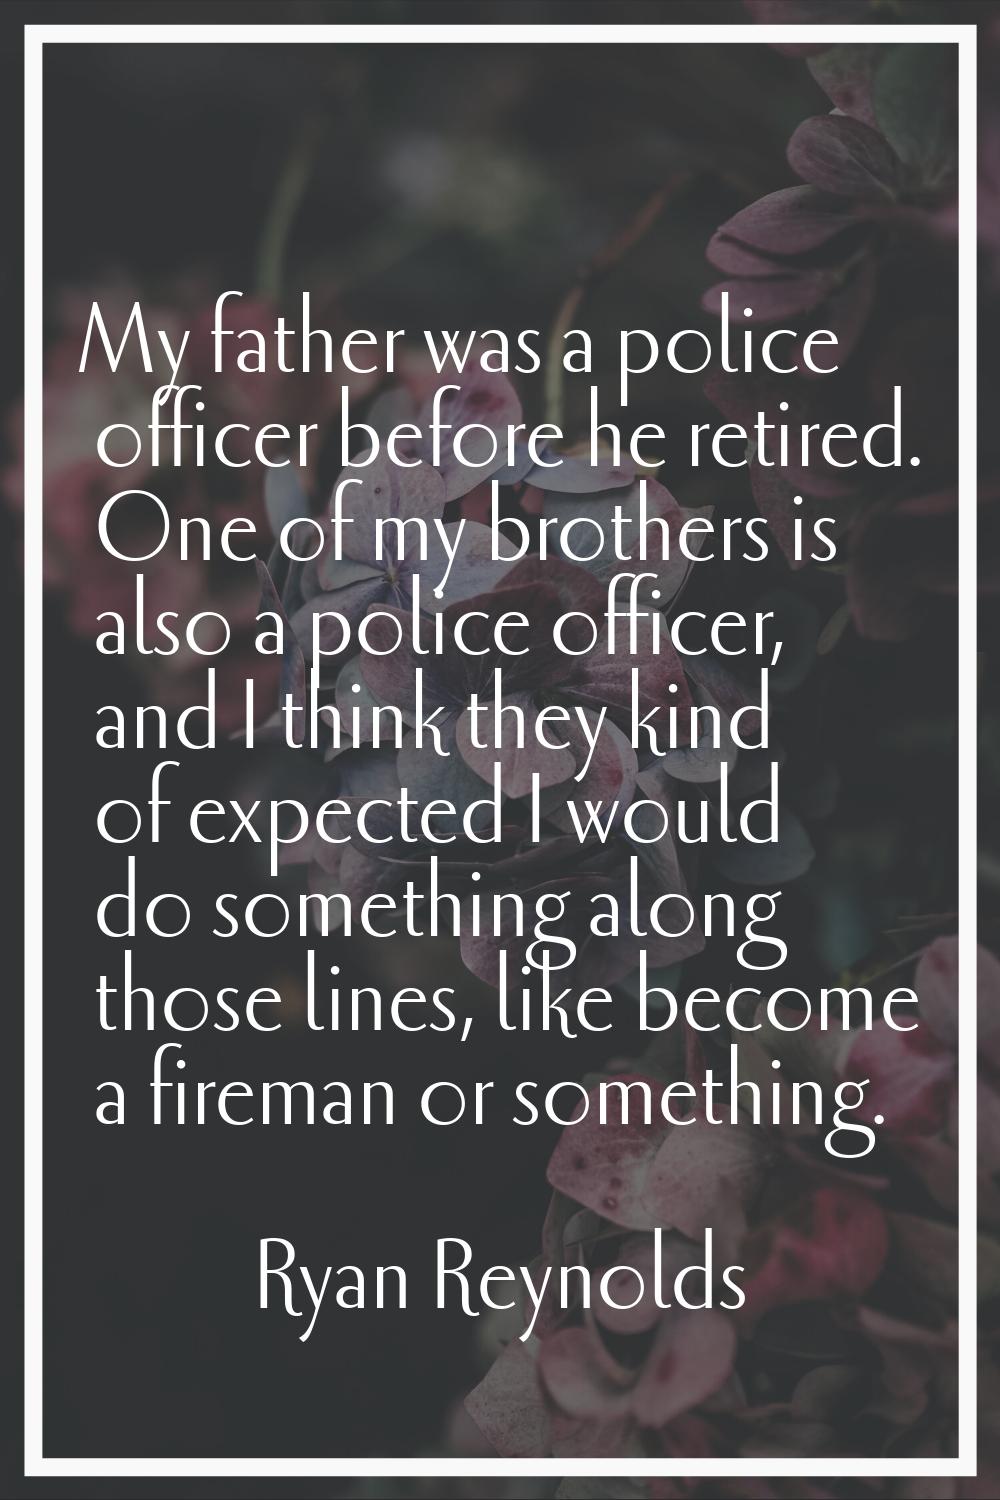 My father was a police officer before he retired. One of my brothers is also a police officer, and 